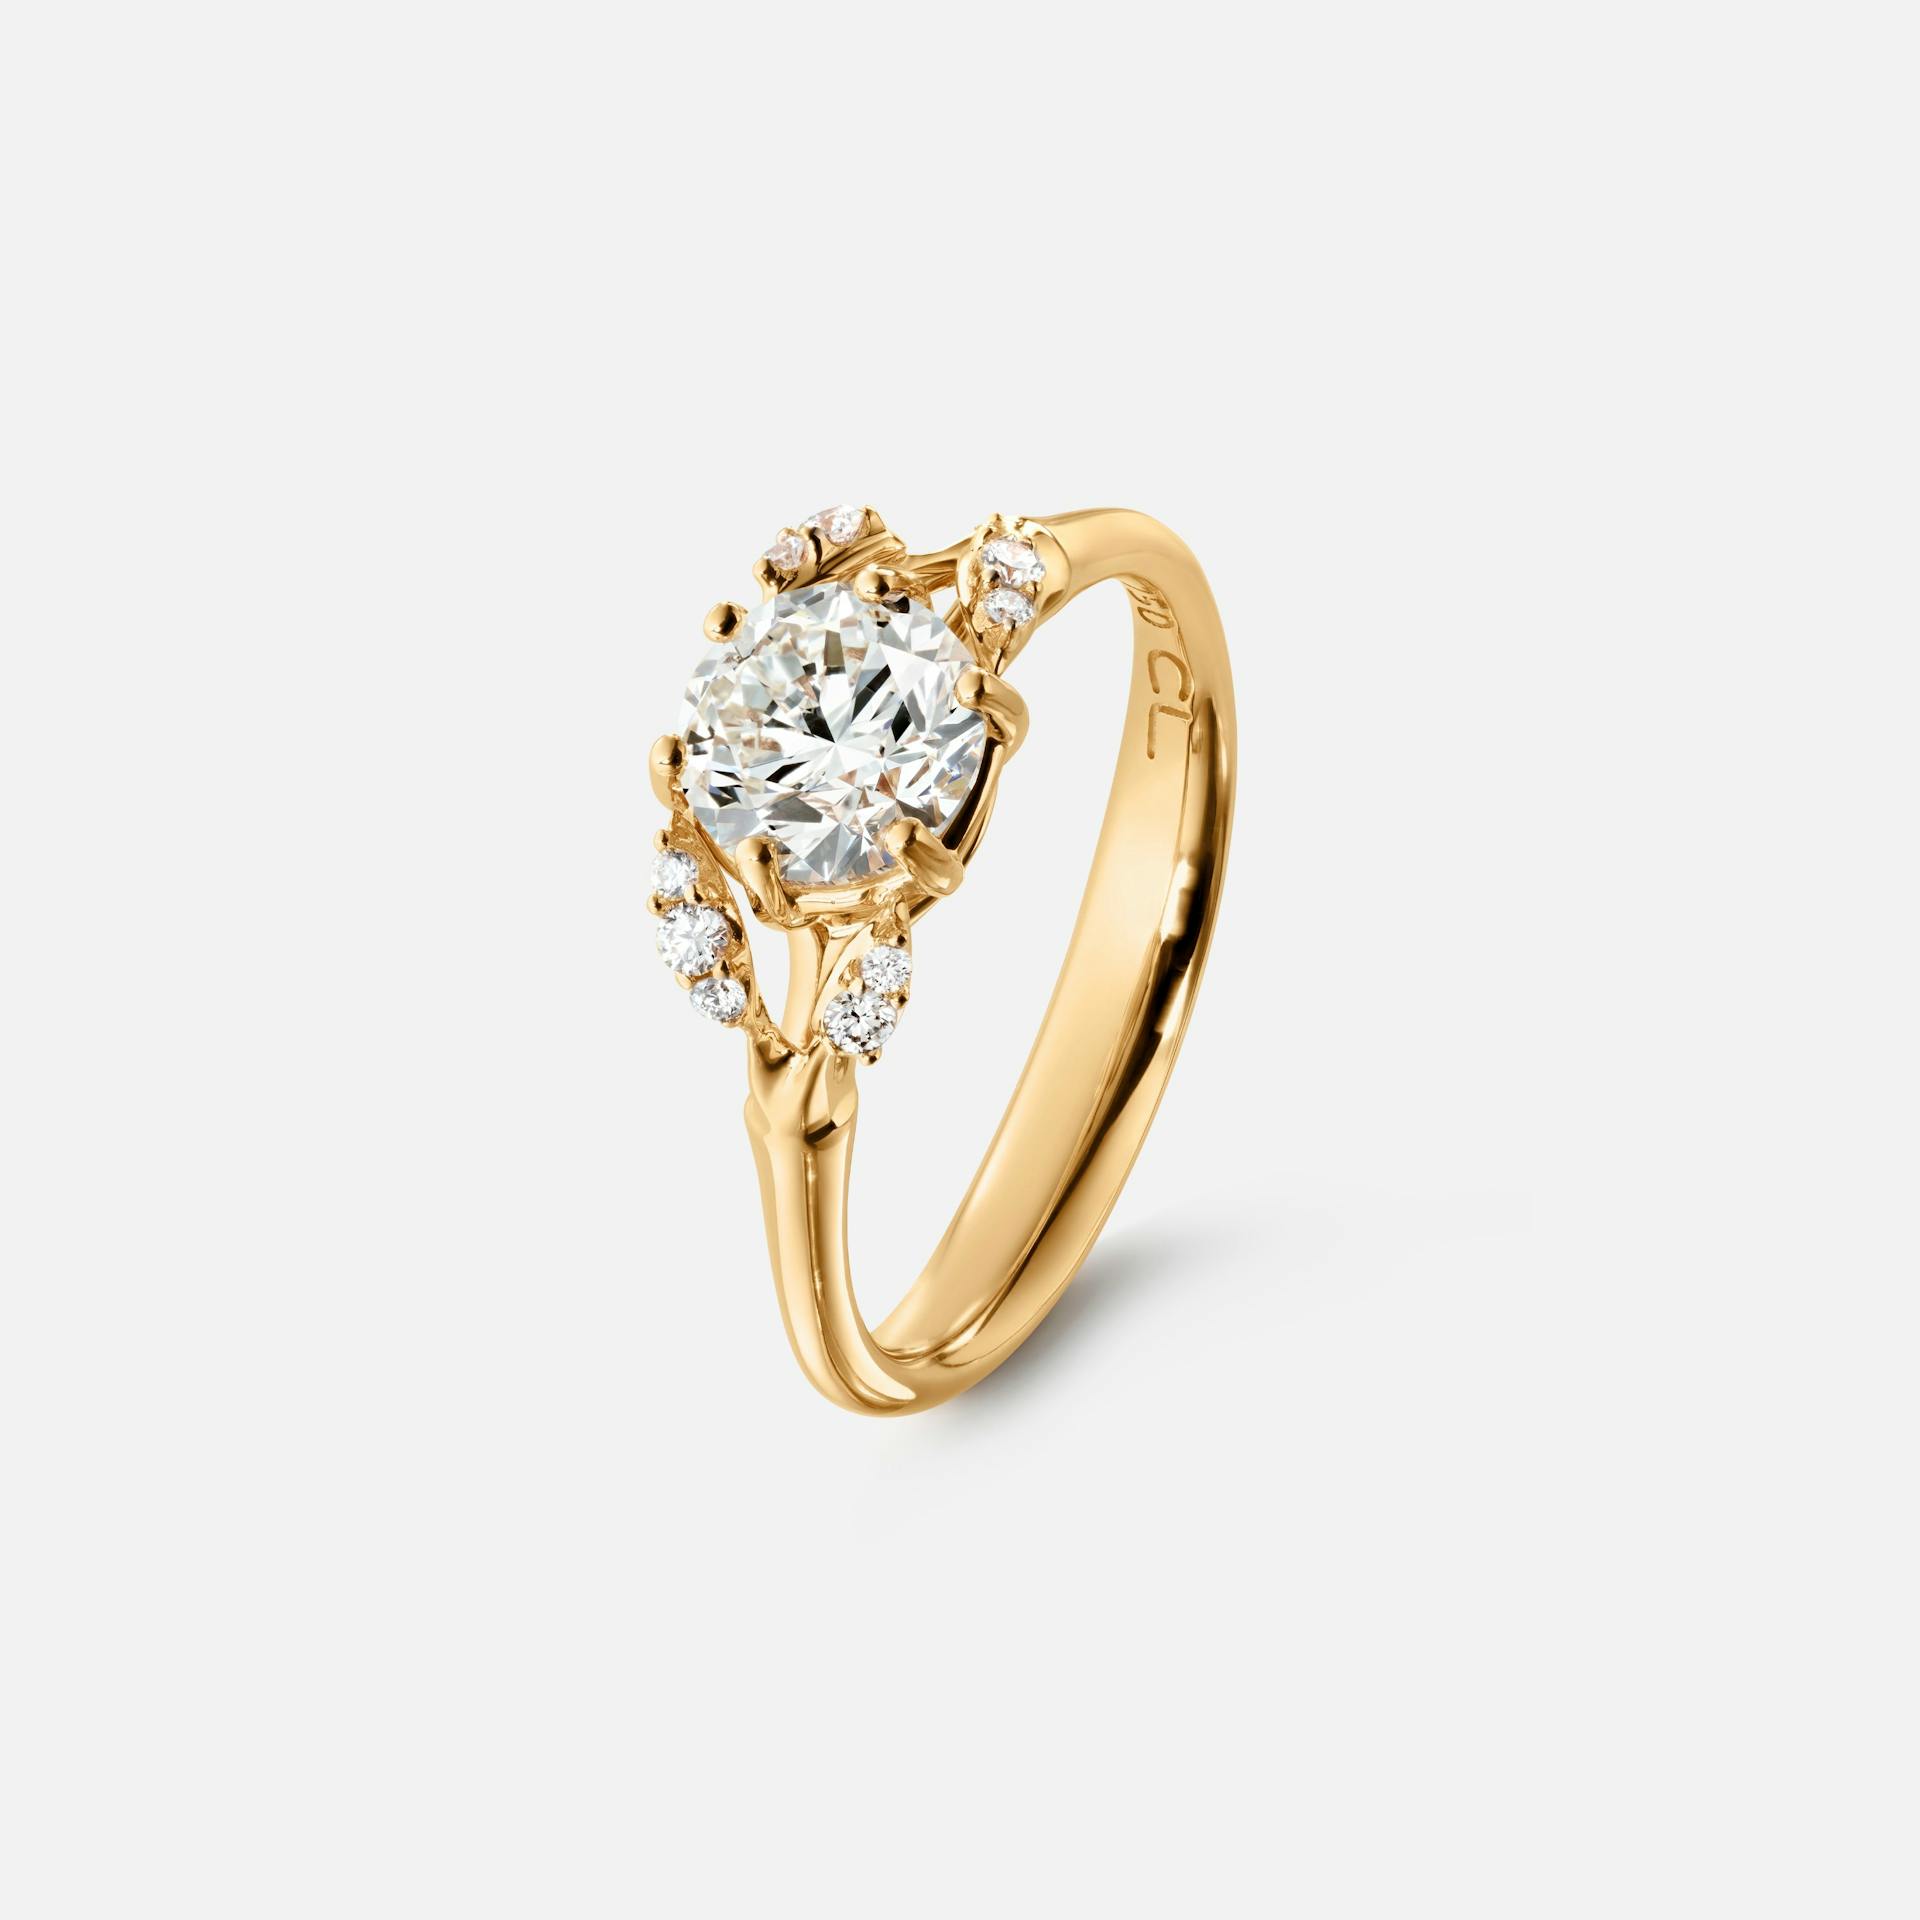 Winter Frost Solitaire ring